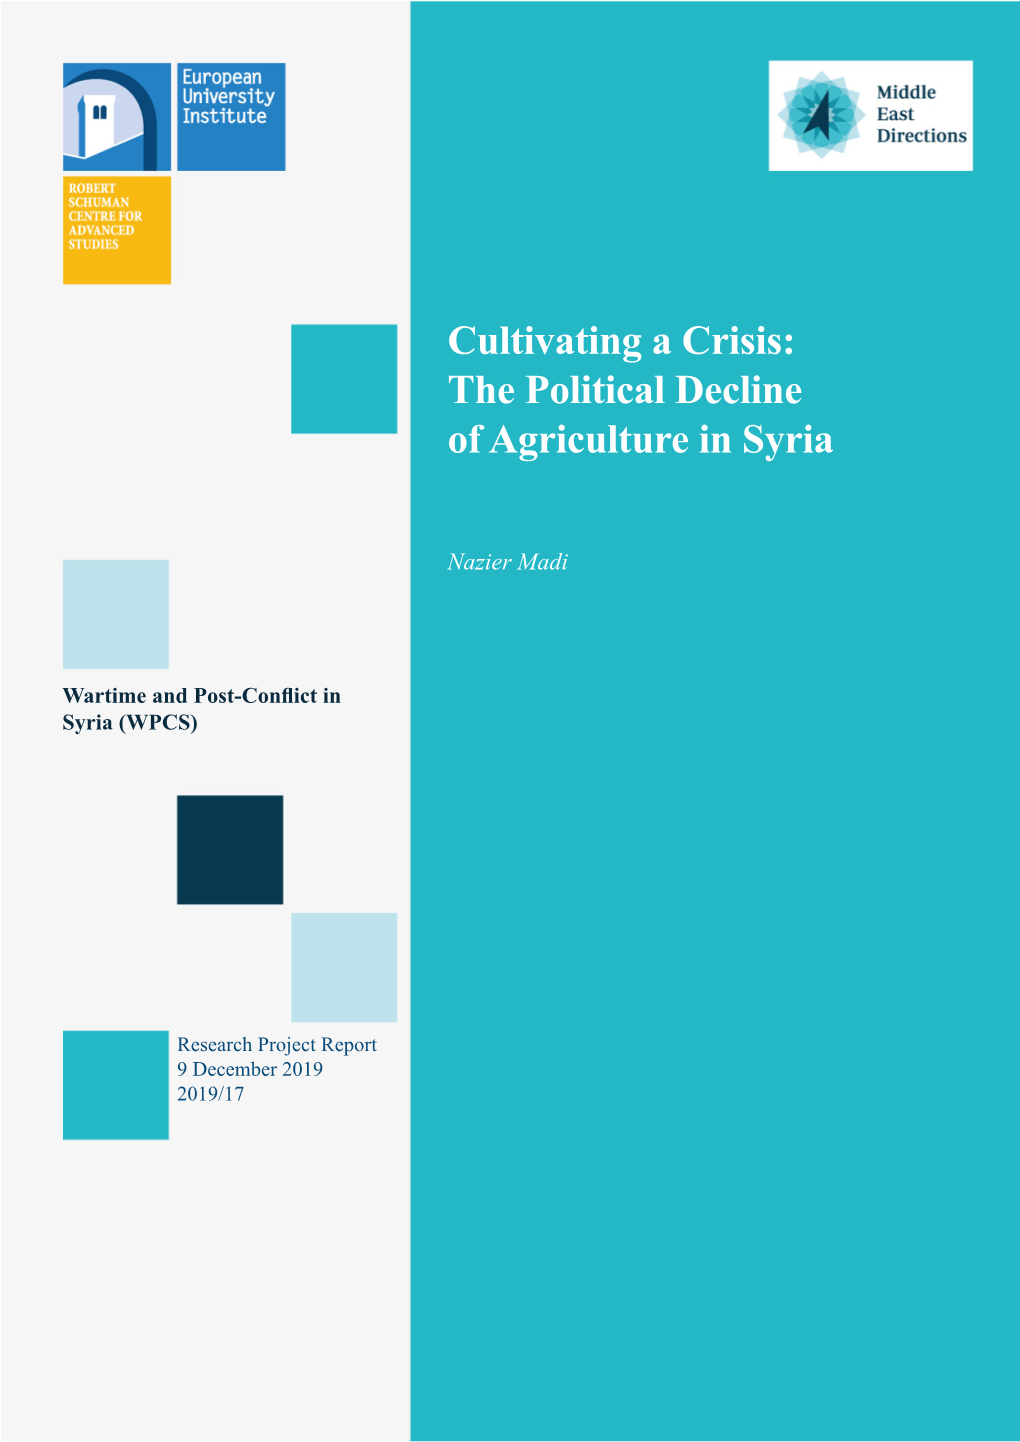 The Political Decline of Agriculture in Syria